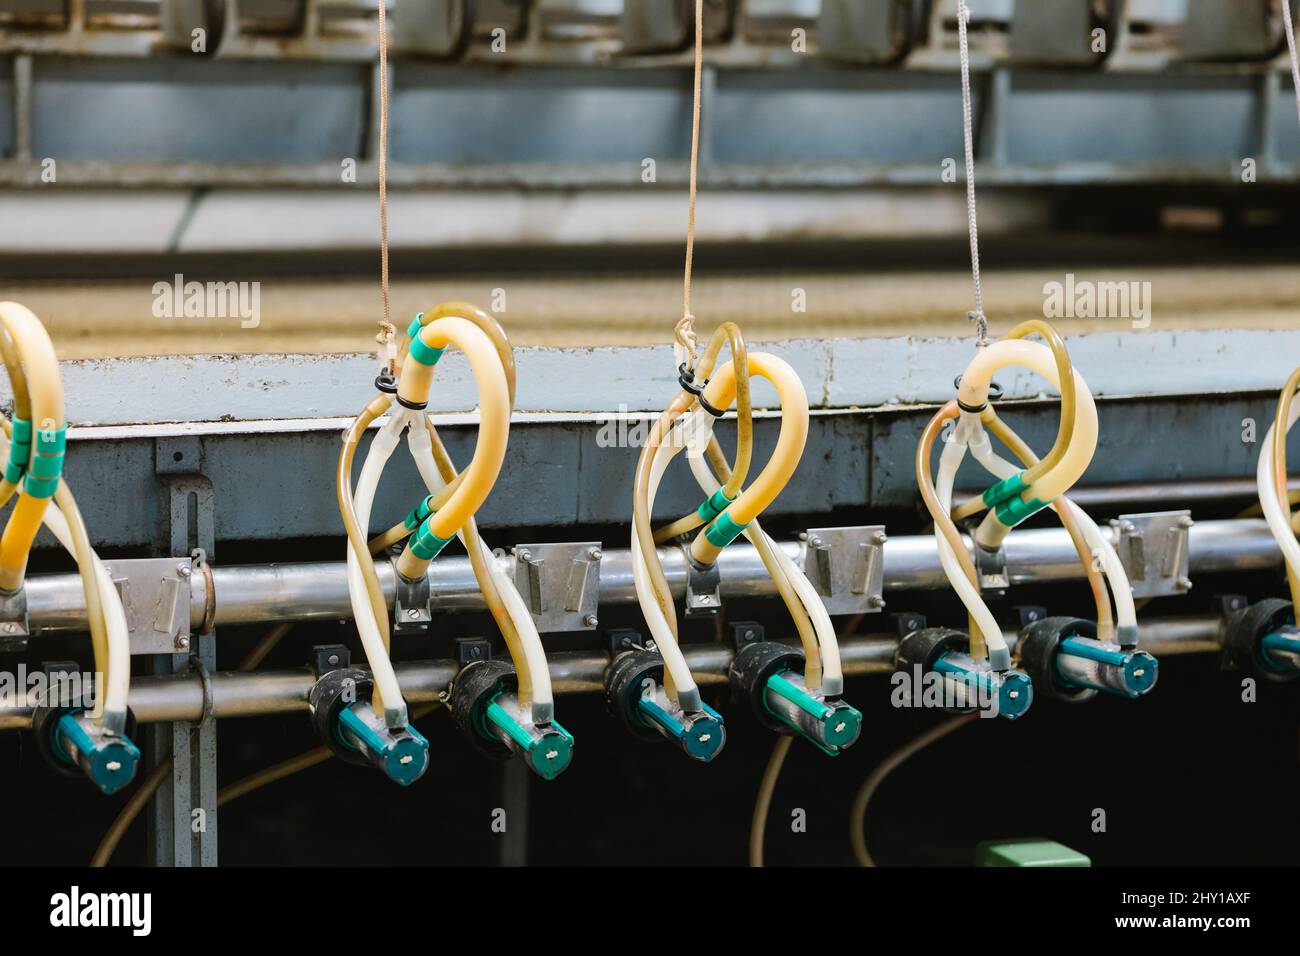 Special modern milking machine with metal pipeline and tubes suspended from strings placed in industrial light factory with professional equipment Stock Photo